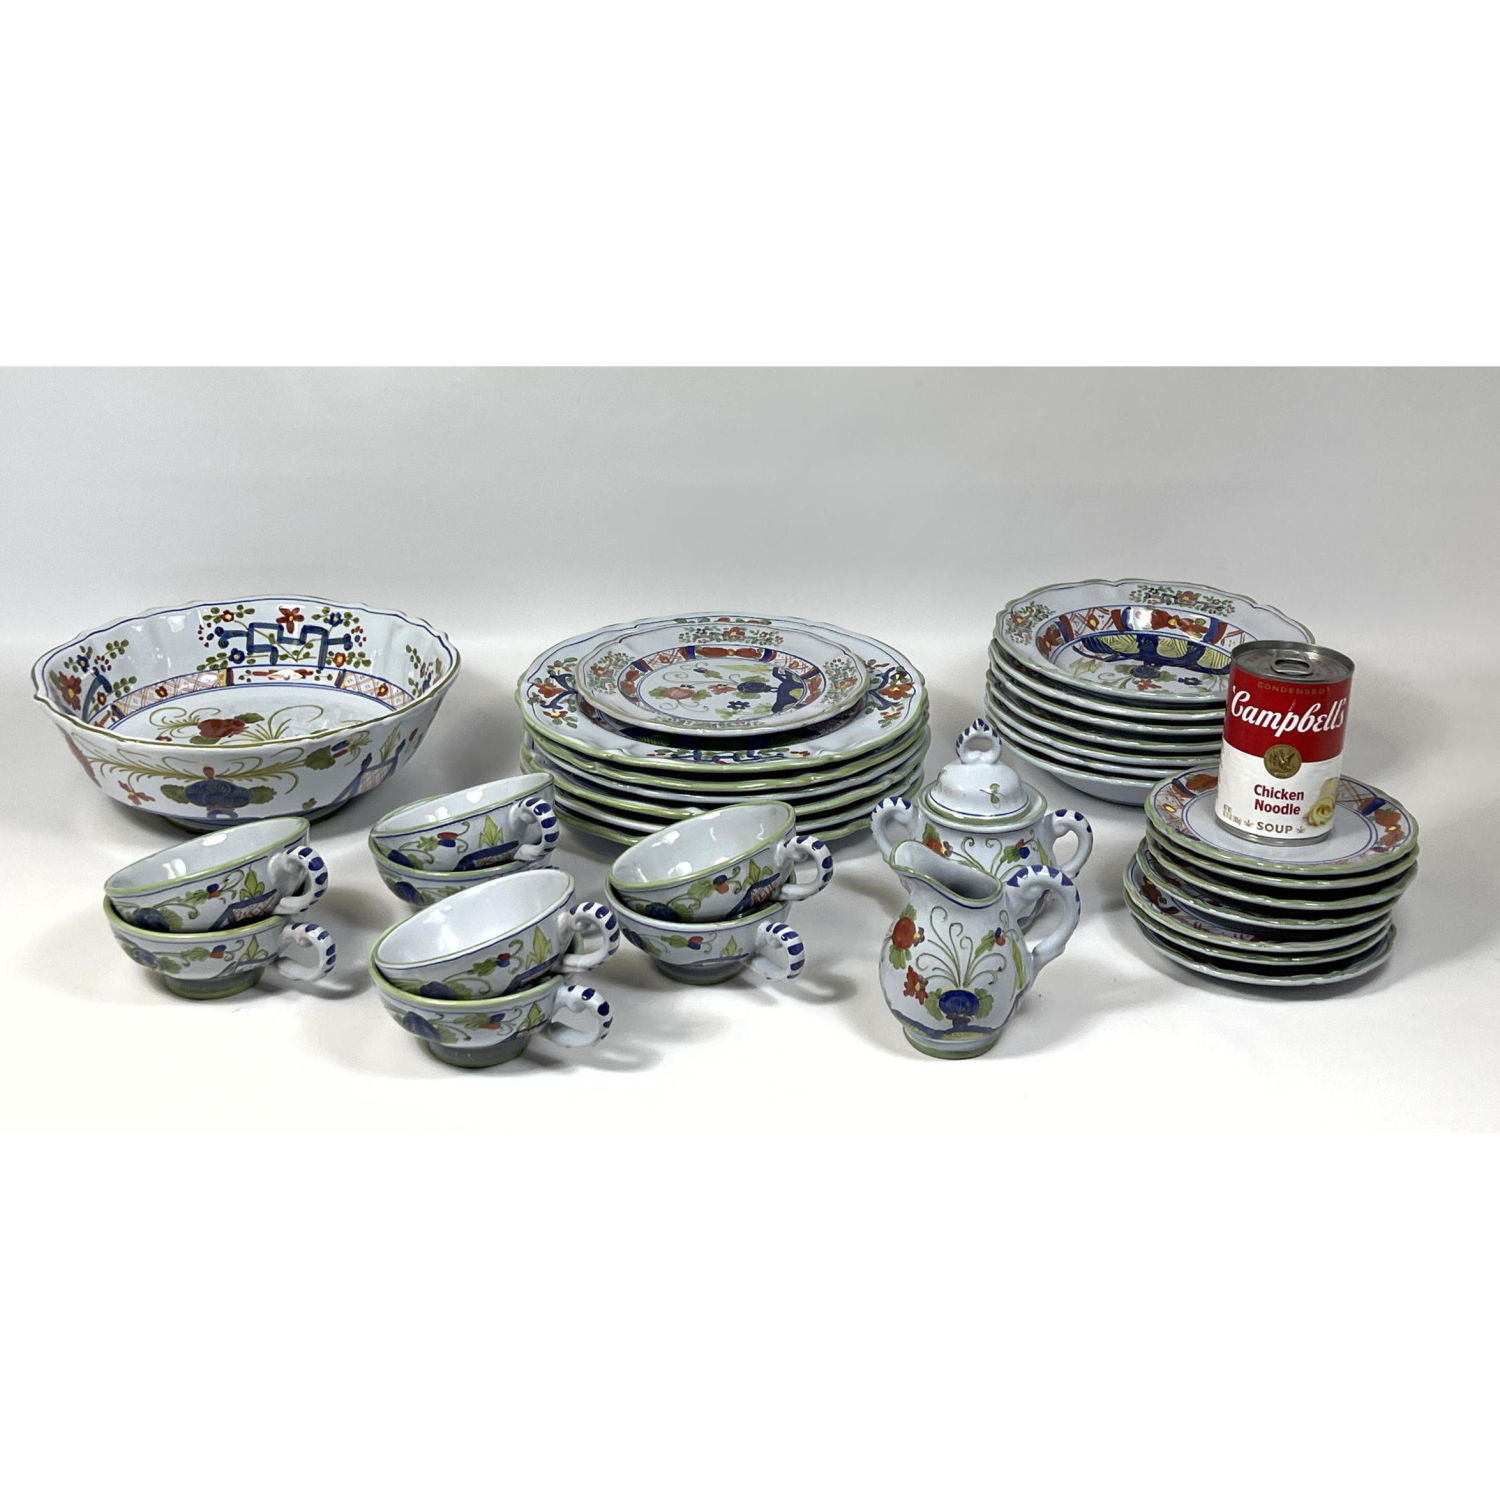 Italy Dinner Set Dishes. Painted design.